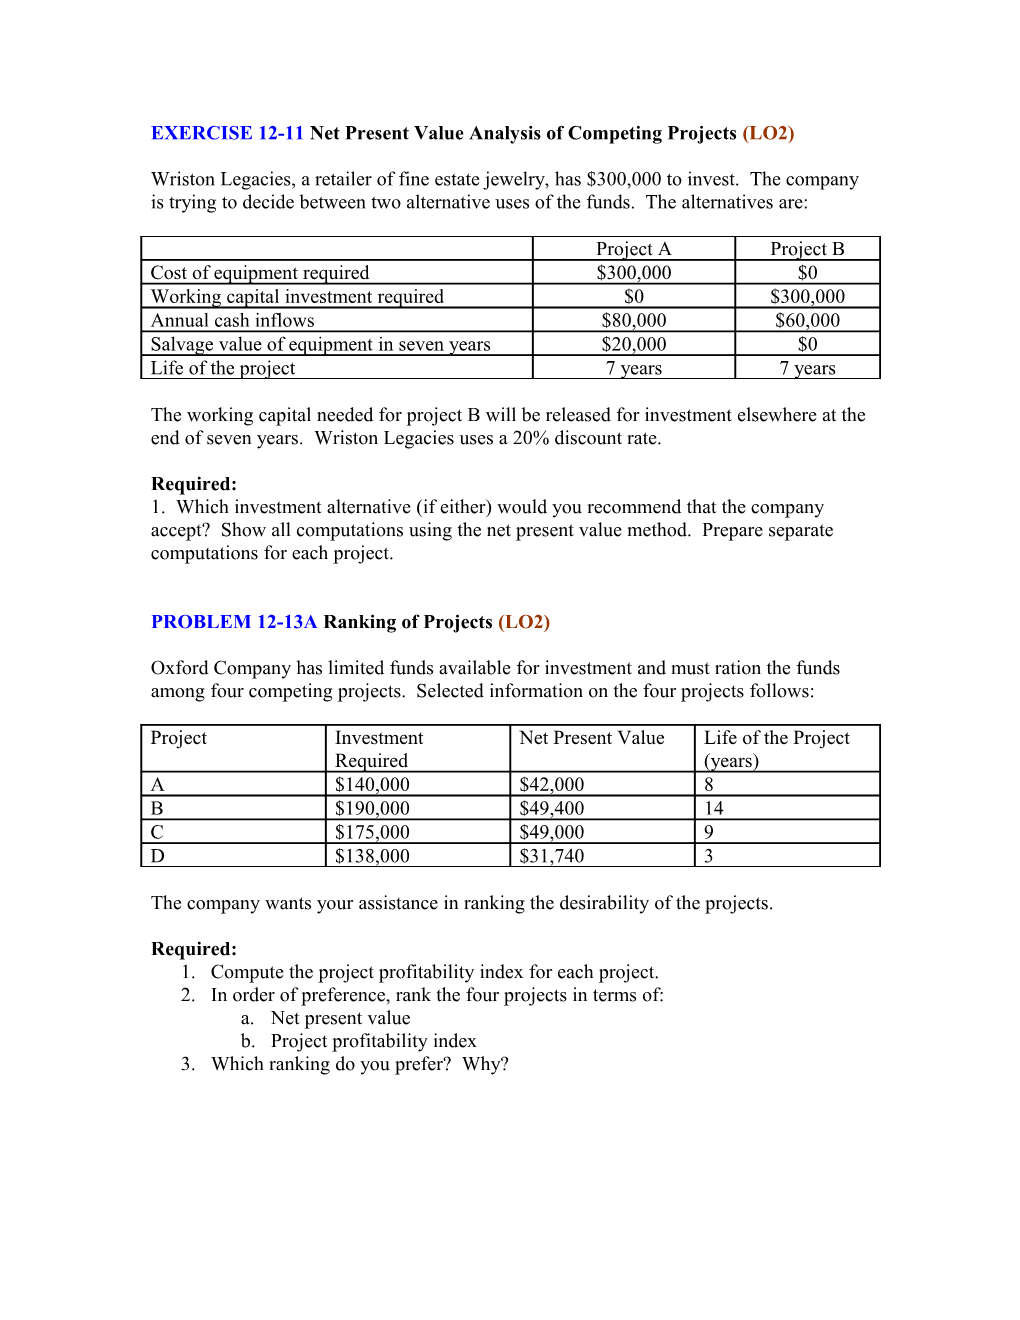 EXERCISE 10-8 Cost-Volume Analysis and Return on Investment (ROI) (LO1)